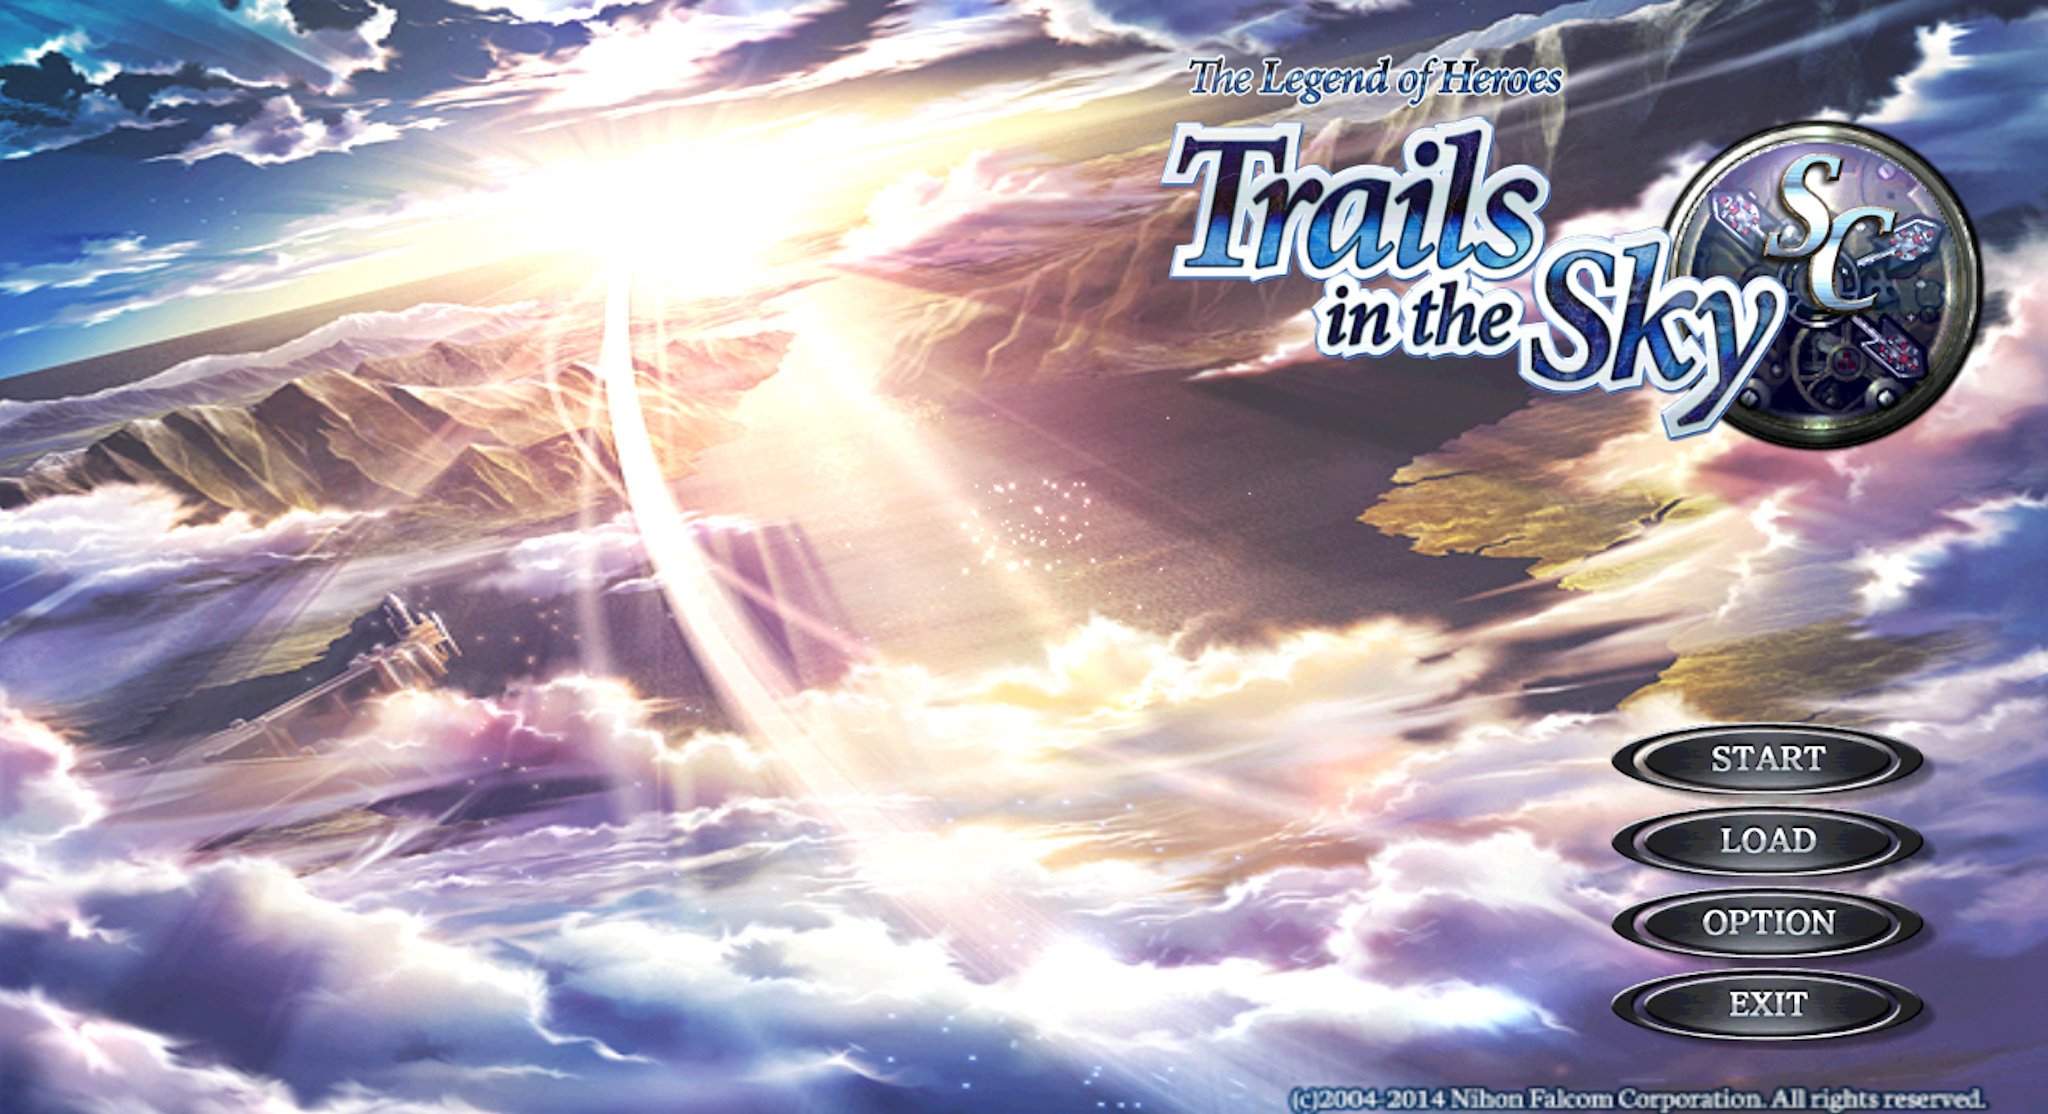 Steam Spotlight: The Legend of Heroes: Trails in the Sky Second Chapter